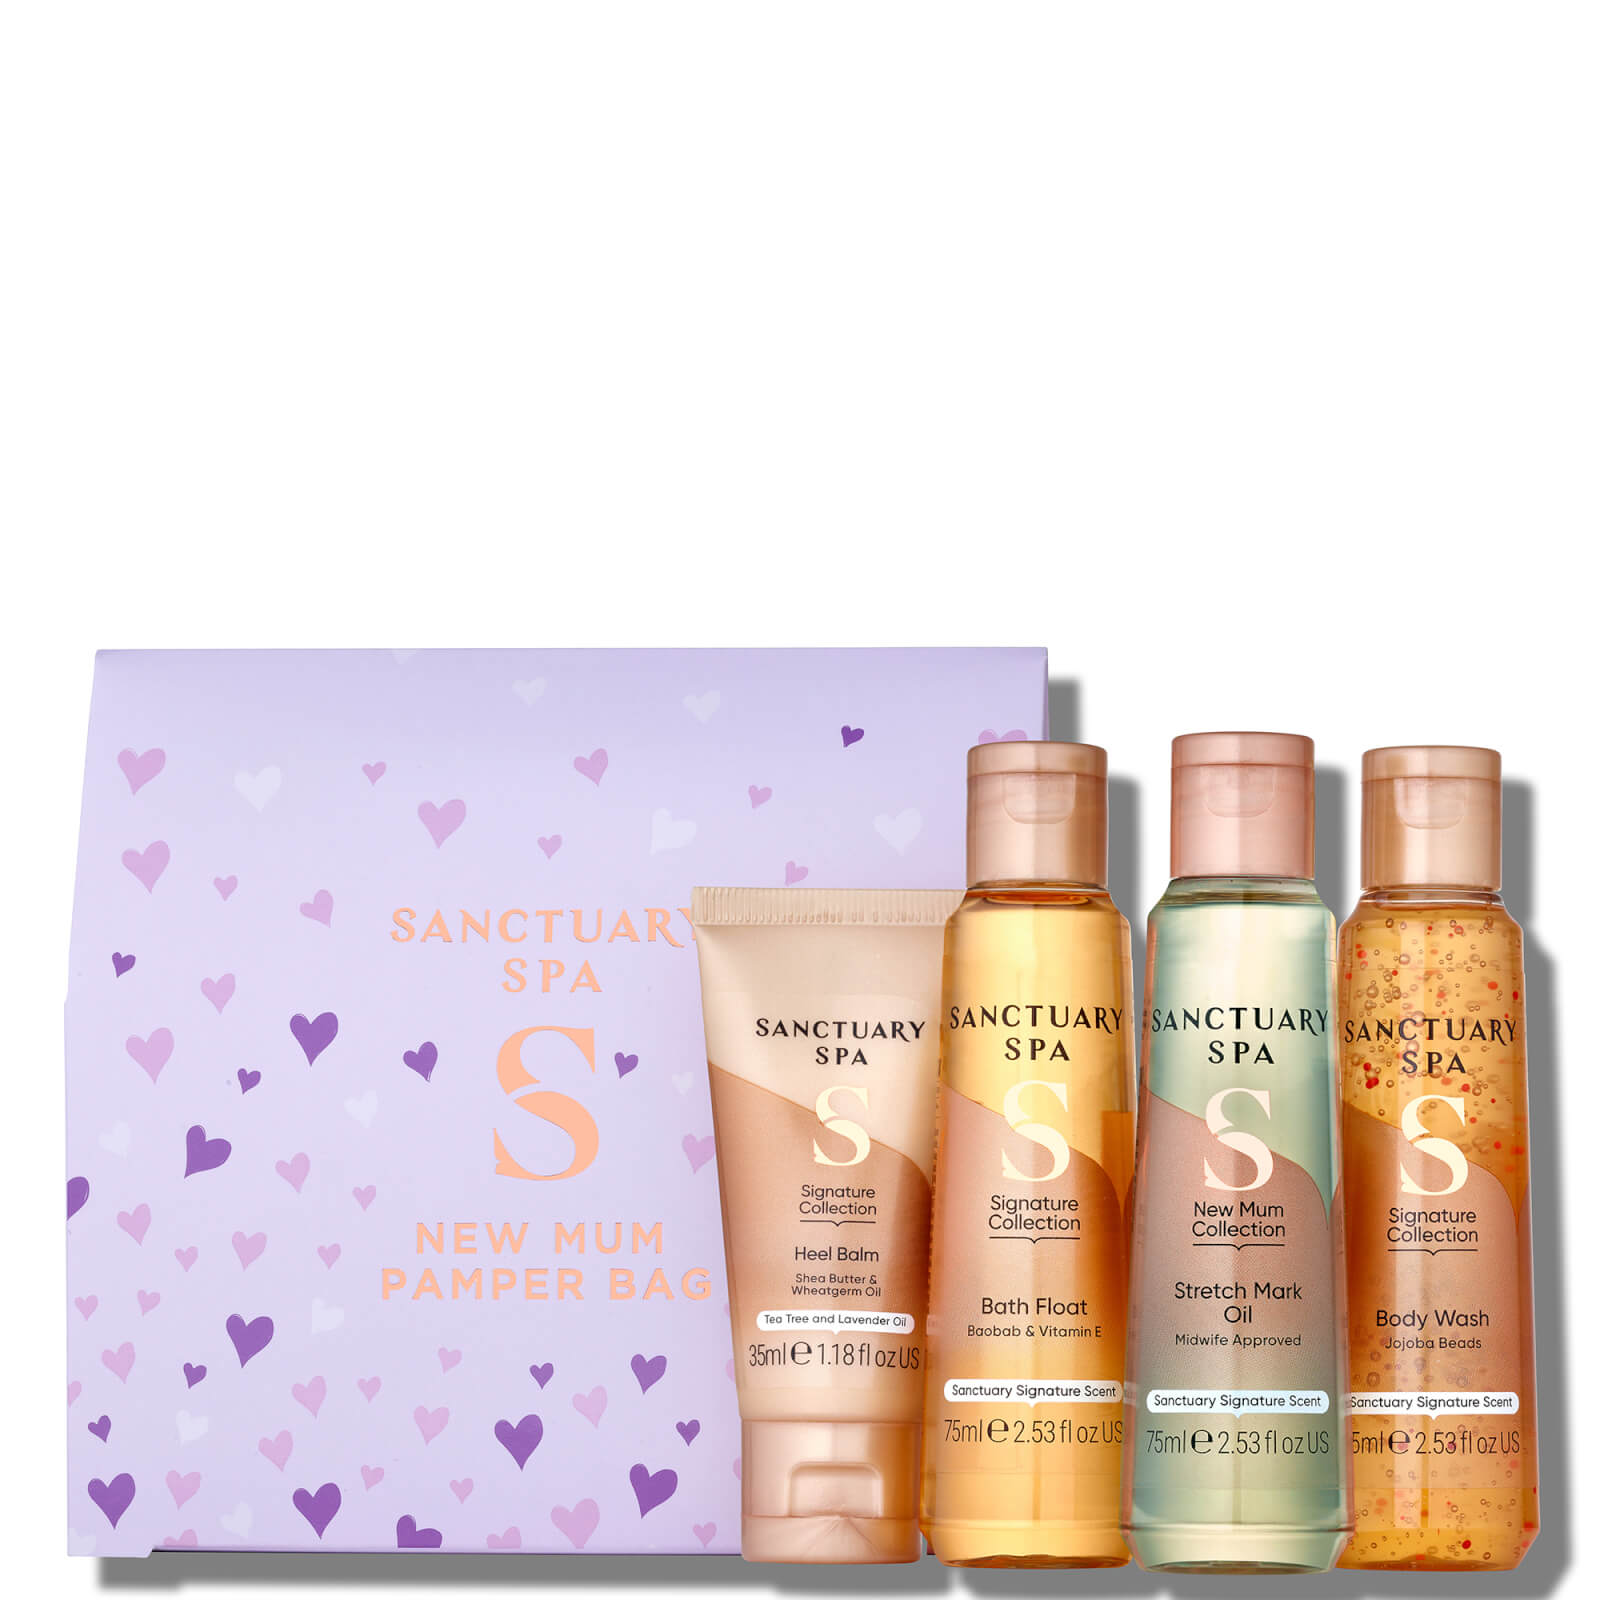 Pz Cussons Beauty Sanctuary Spa New Mum To Be Heart Box Gift Set